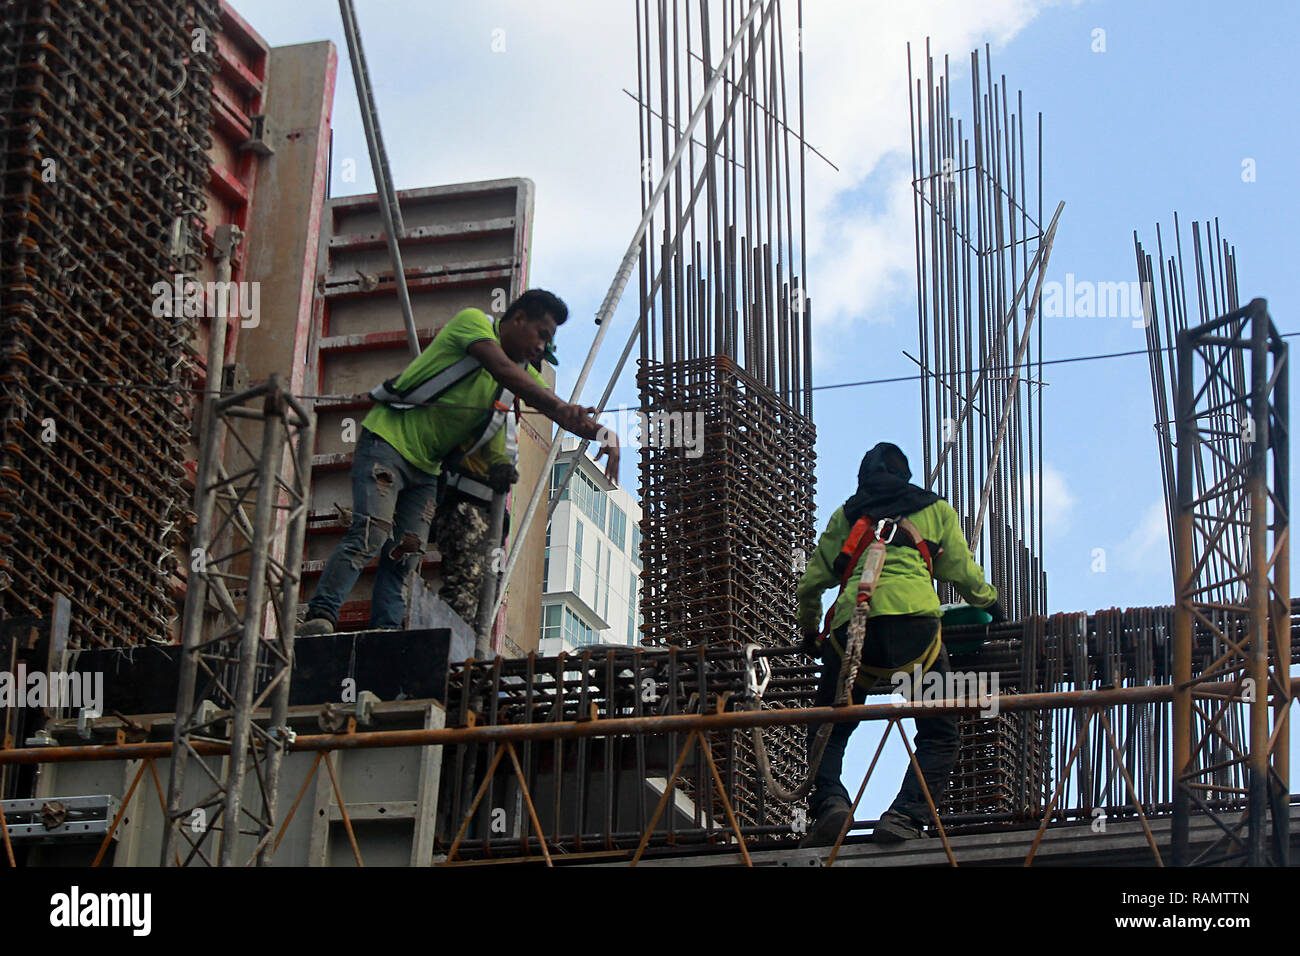 Quezon, Philippines. 4th Jan, 2019. Laborers work at a construction site in Quezon City, the Philippines, Jan. 4, 2019. The inflation in the Philippines decelerated to 5.1 percent in December 2018 from 6 percent in November 2018 amid a sharp drop in global oil prices, higher domestic rice supply and a slight recovery of the peso, the Philippine Statistics Authority (PSA) said on Friday. Credit: Rouelle Umali/Xinhua/Alamy Live News Stock Photo